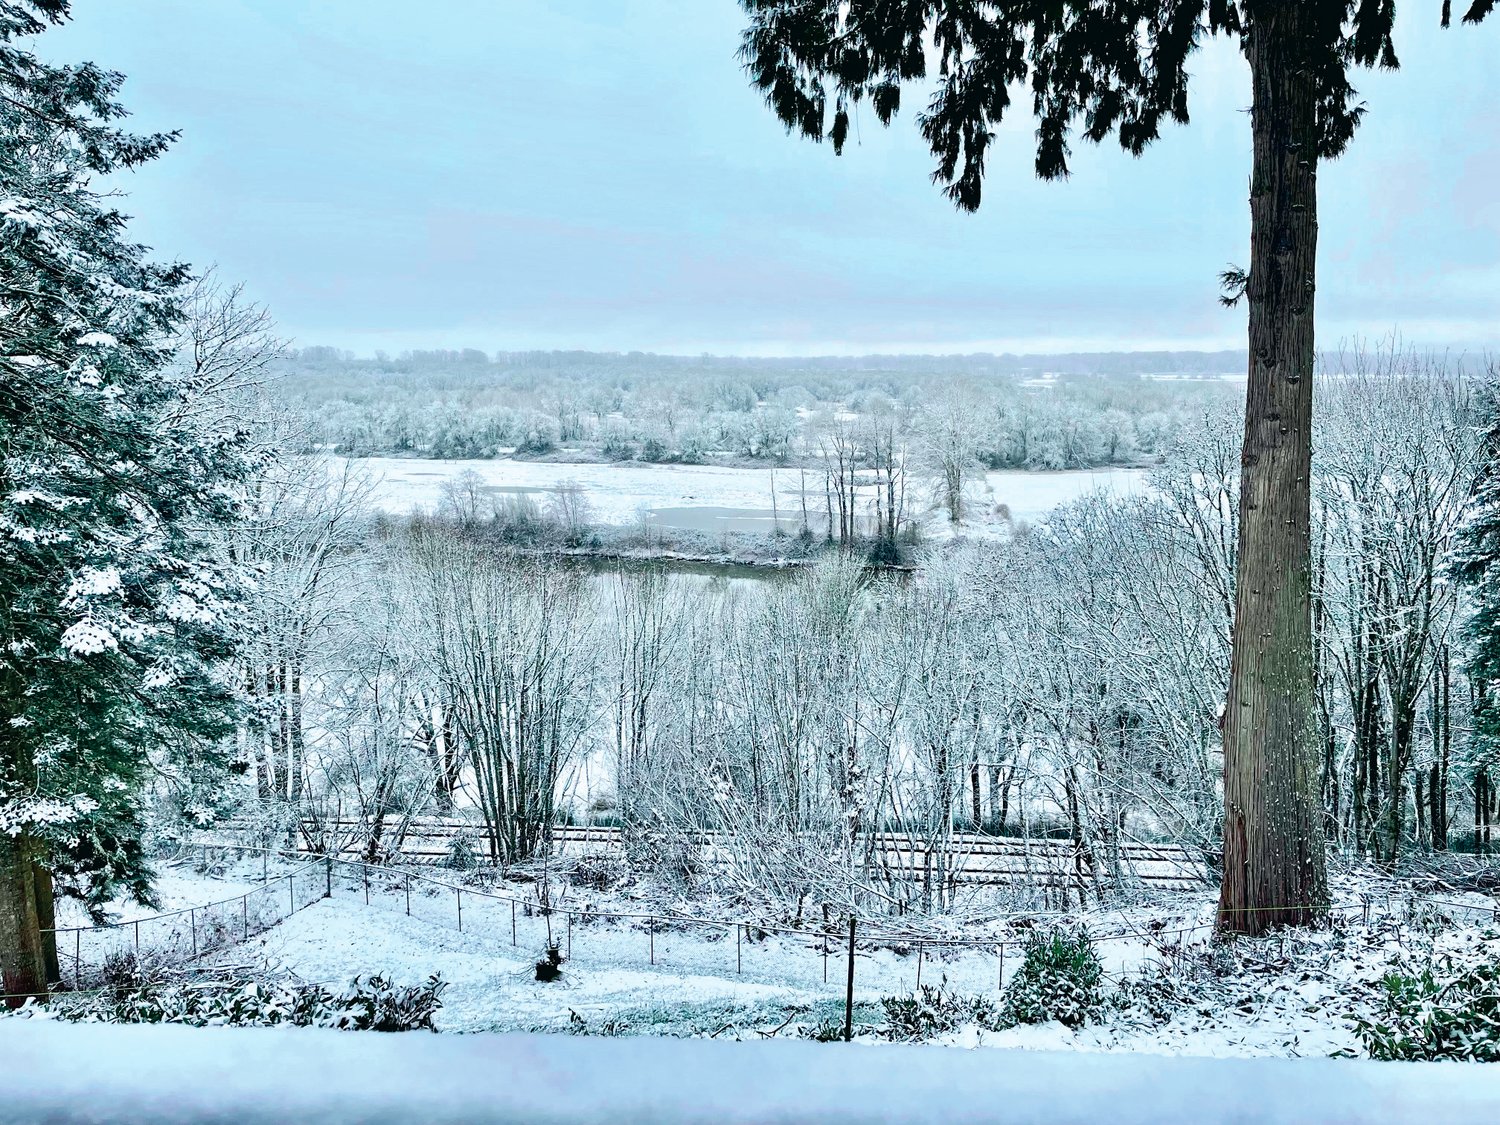 Bianca Streif took this photo of Lake River and the Ridgefield National Wildlife Refuge on Dec. 27.